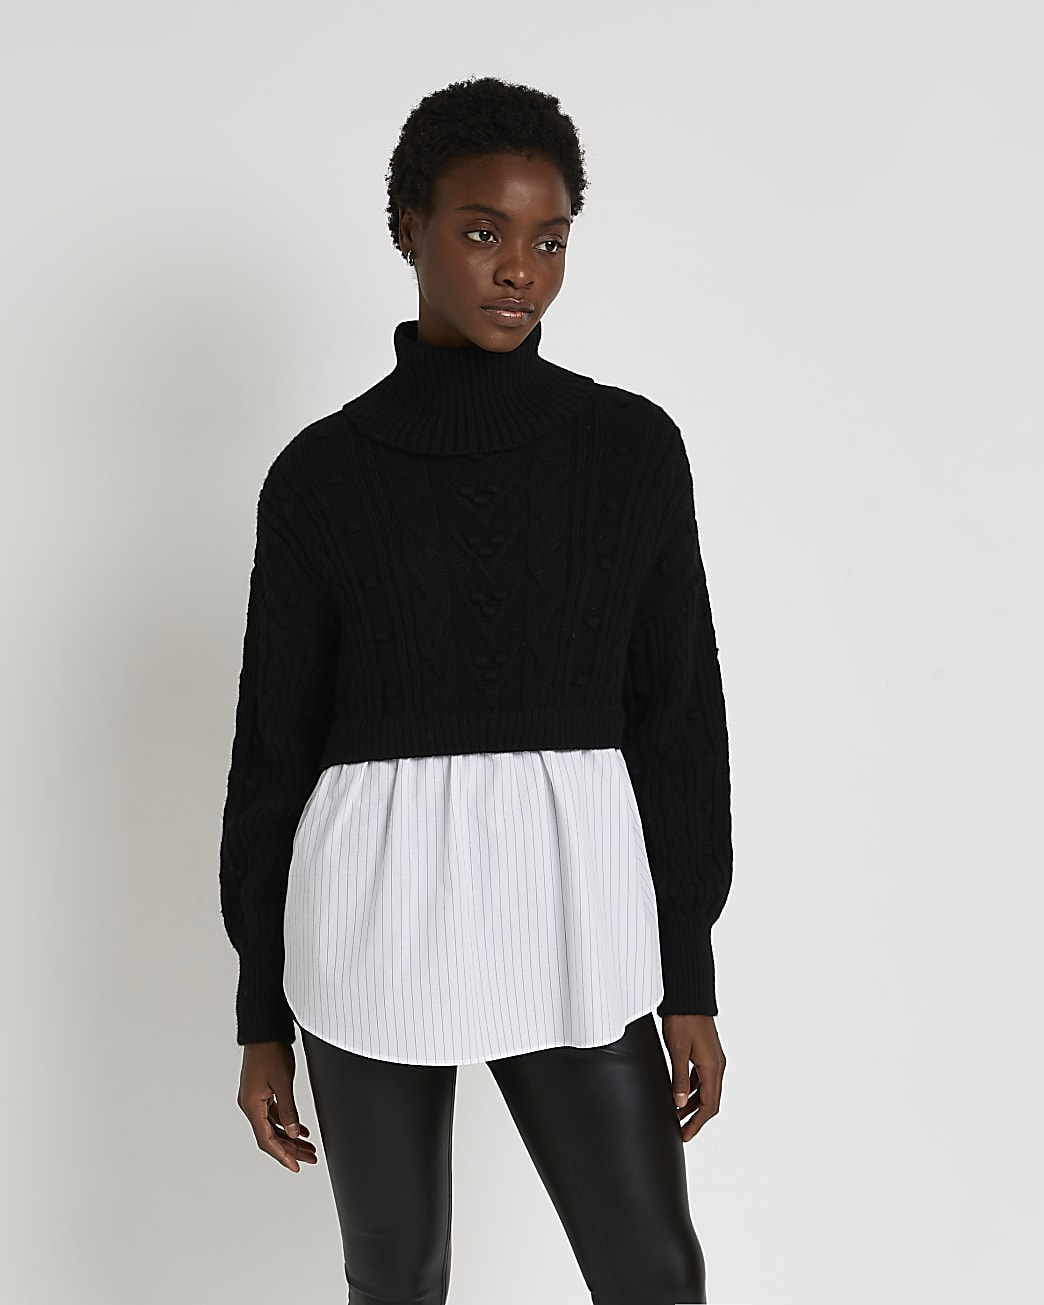 Black chunky cable knit shirt jumper